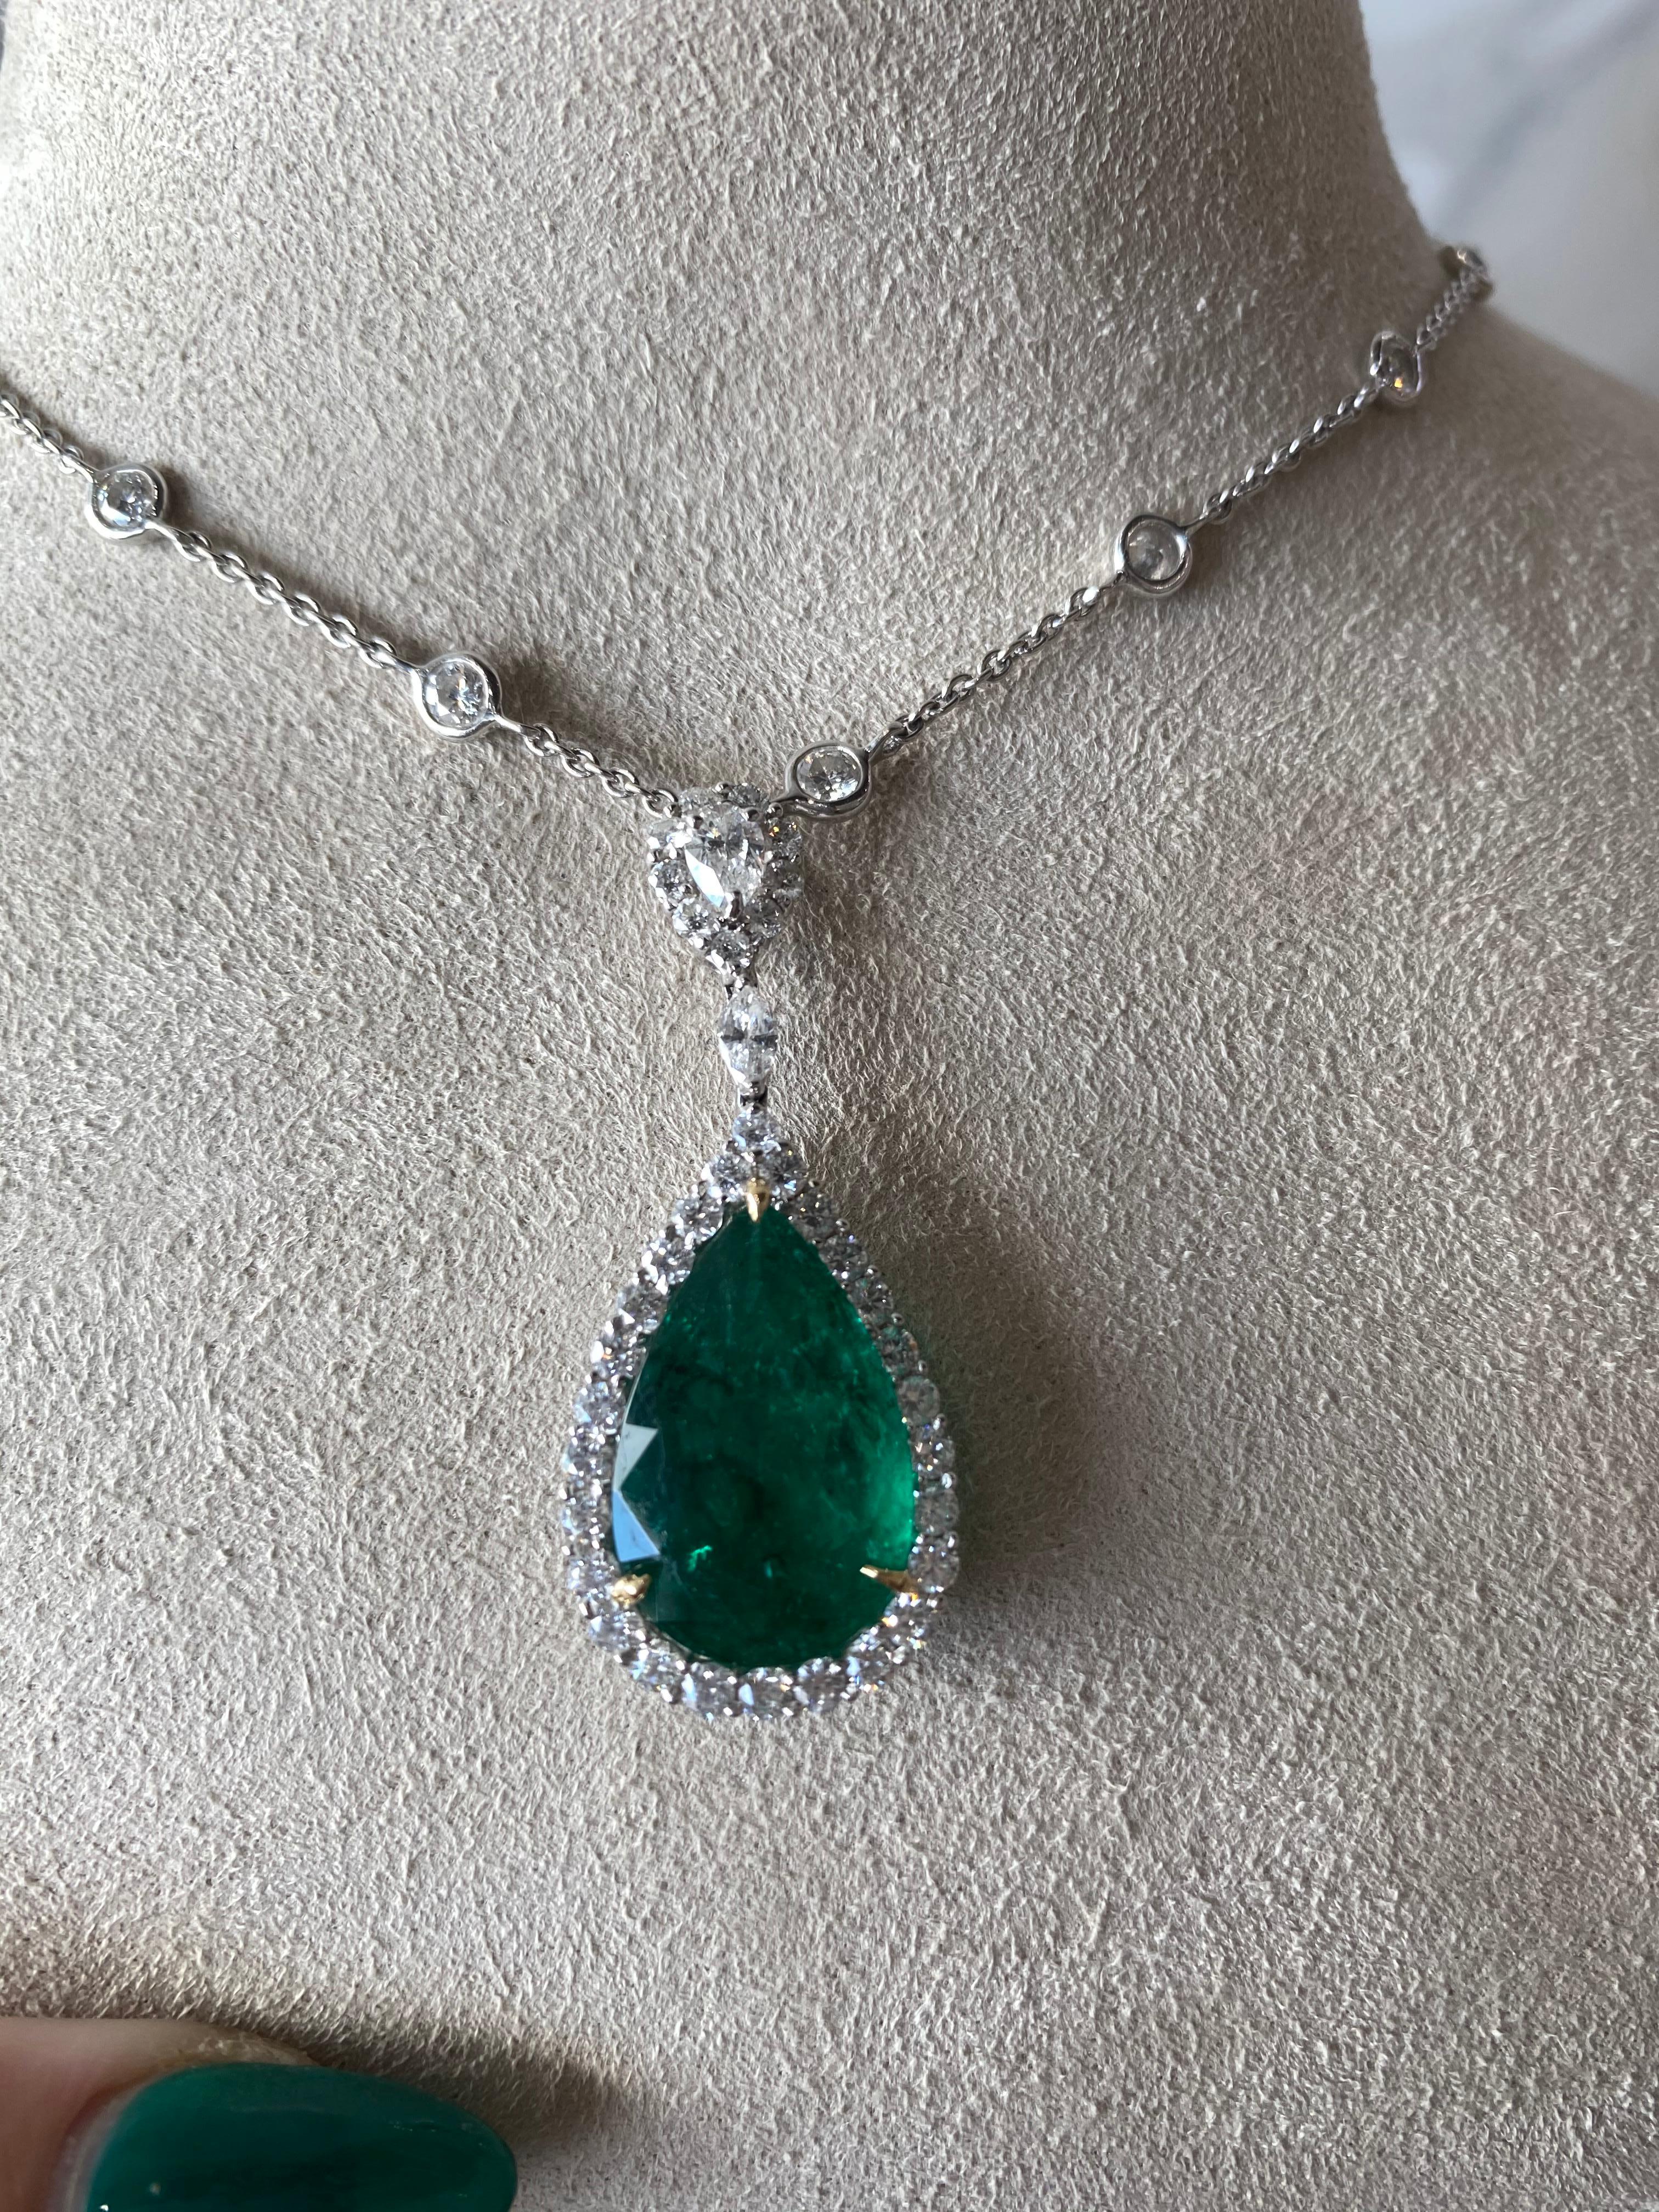 This exquisite necklace seamlessly blends the more classic style of a diamonds-by-the-yard style necklace featuring 3.82ct total weight in round diamonds and the more regal style of a 6.75ct pear shaped emerald, surrounded by a round diamond halo.